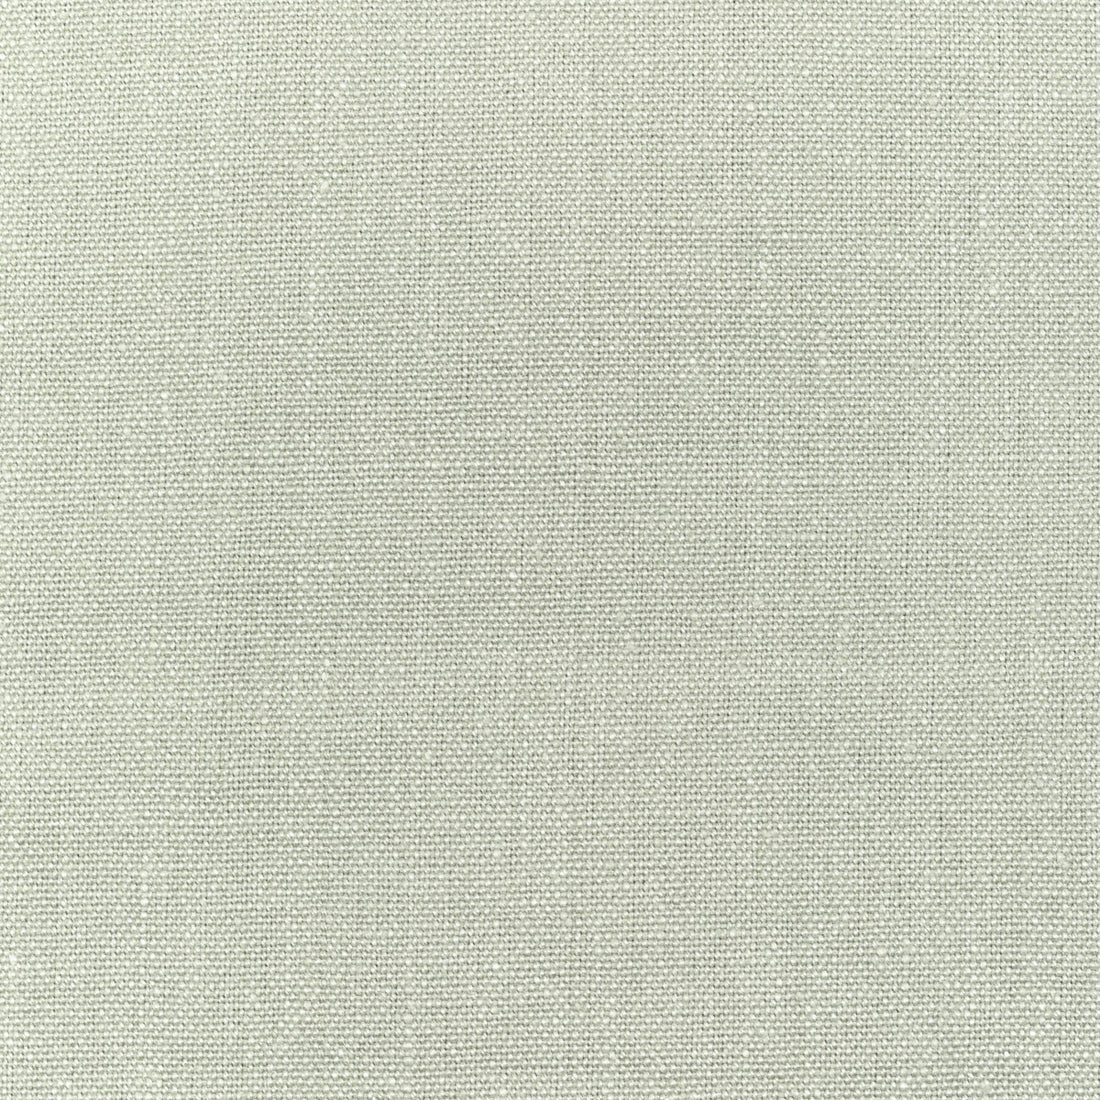 Knightsbridge fabric in pale aqua color - pattern PF50199.715.0 - by Baker Lifestyle in the Perfect Plains collection